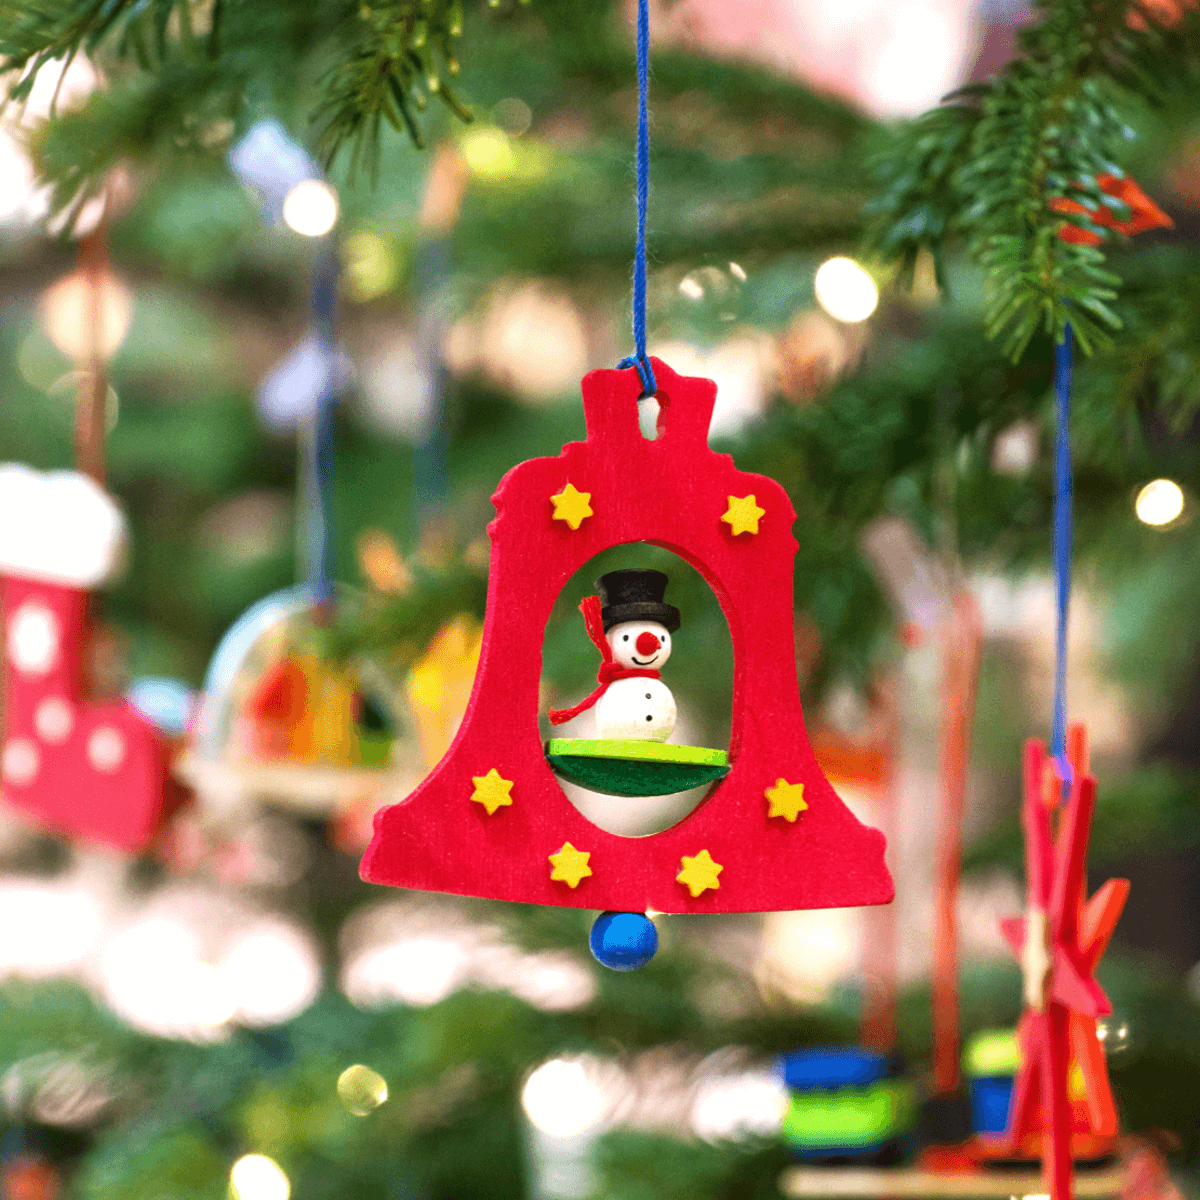 Bell with miniature figures Ornament with snowman